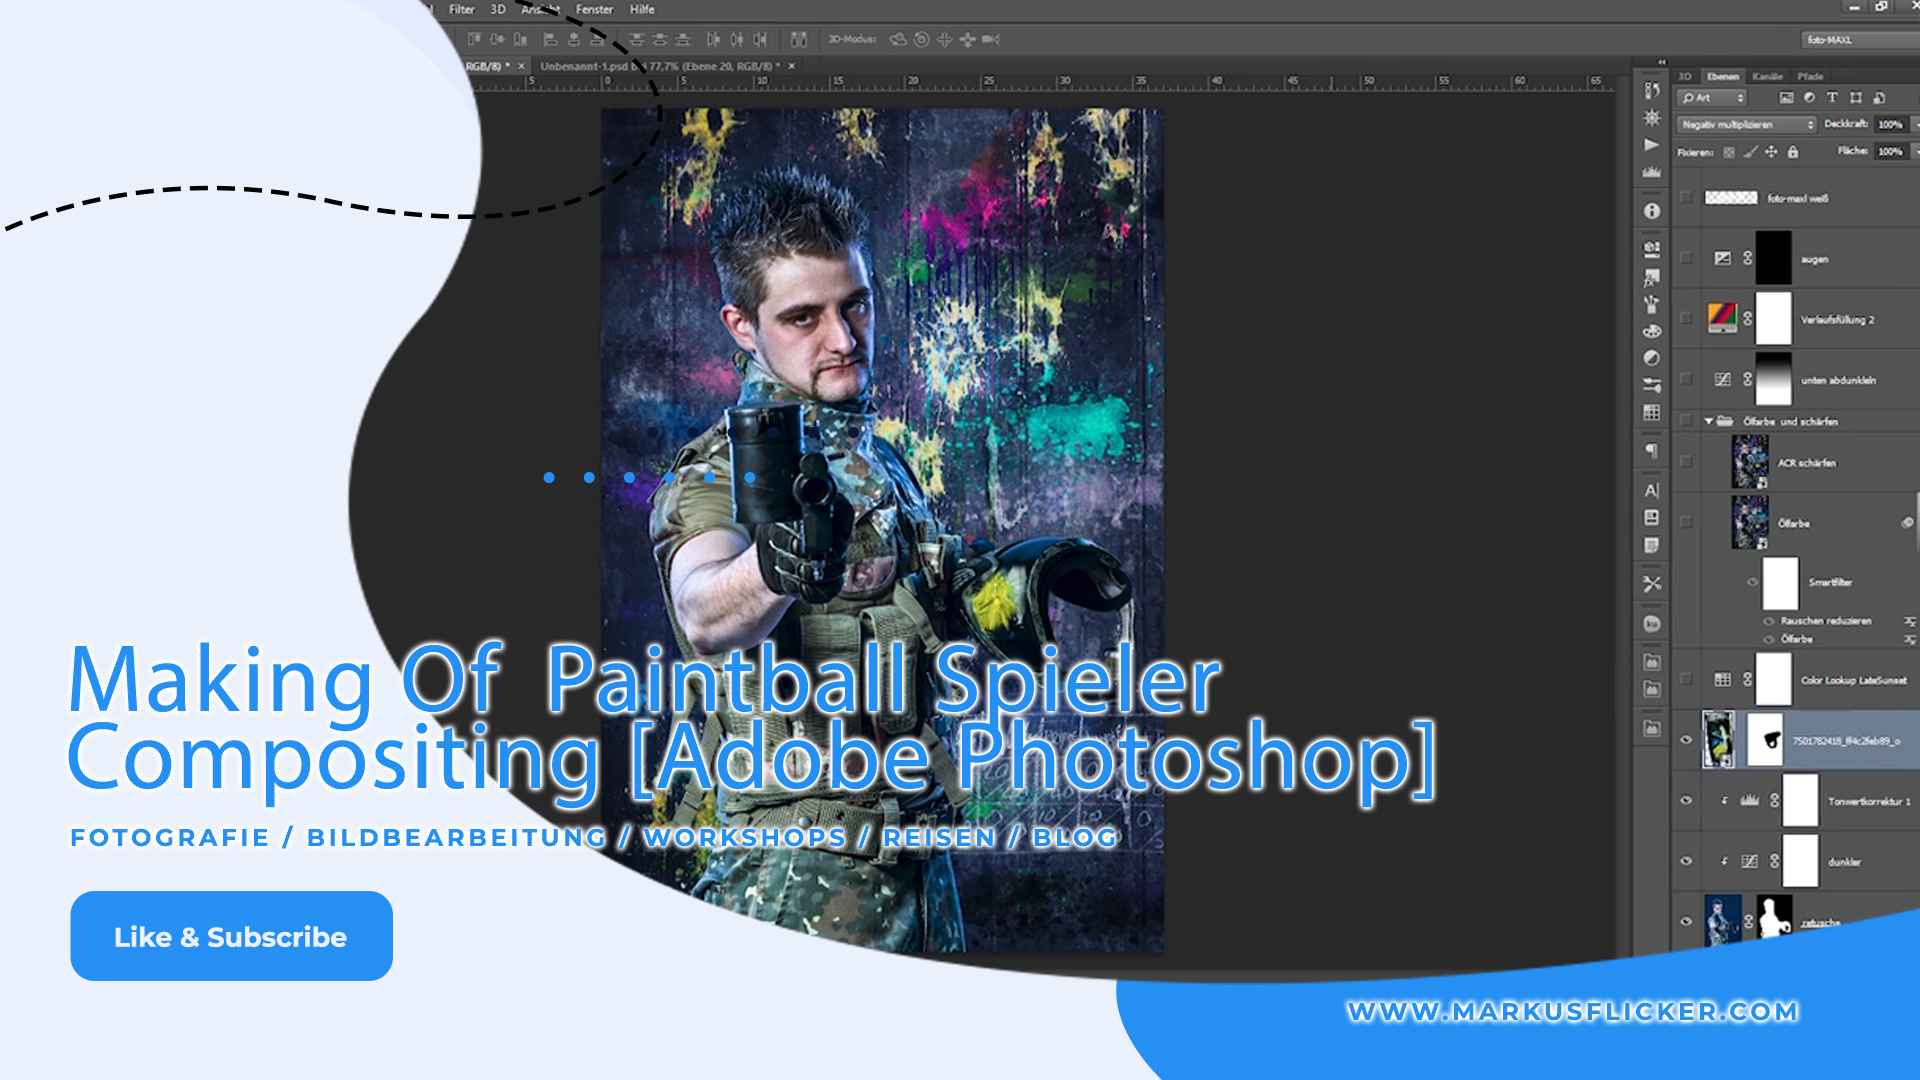 Making Of YouTube Video – Paintball Spieler Compositing [Adobe Photoshop]